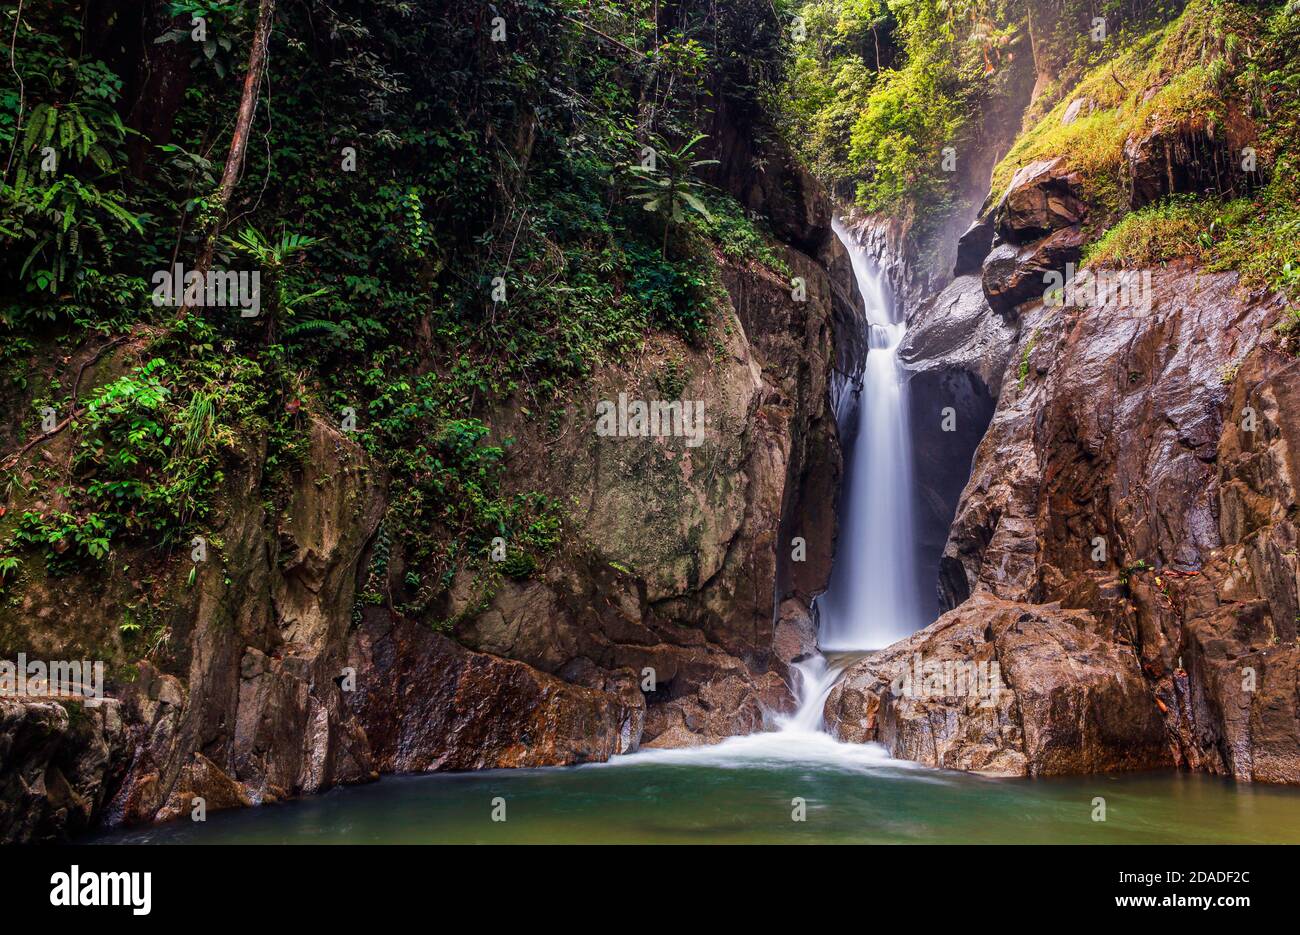 The waterfalls of Chiling River, Malaysia. Stock Photo